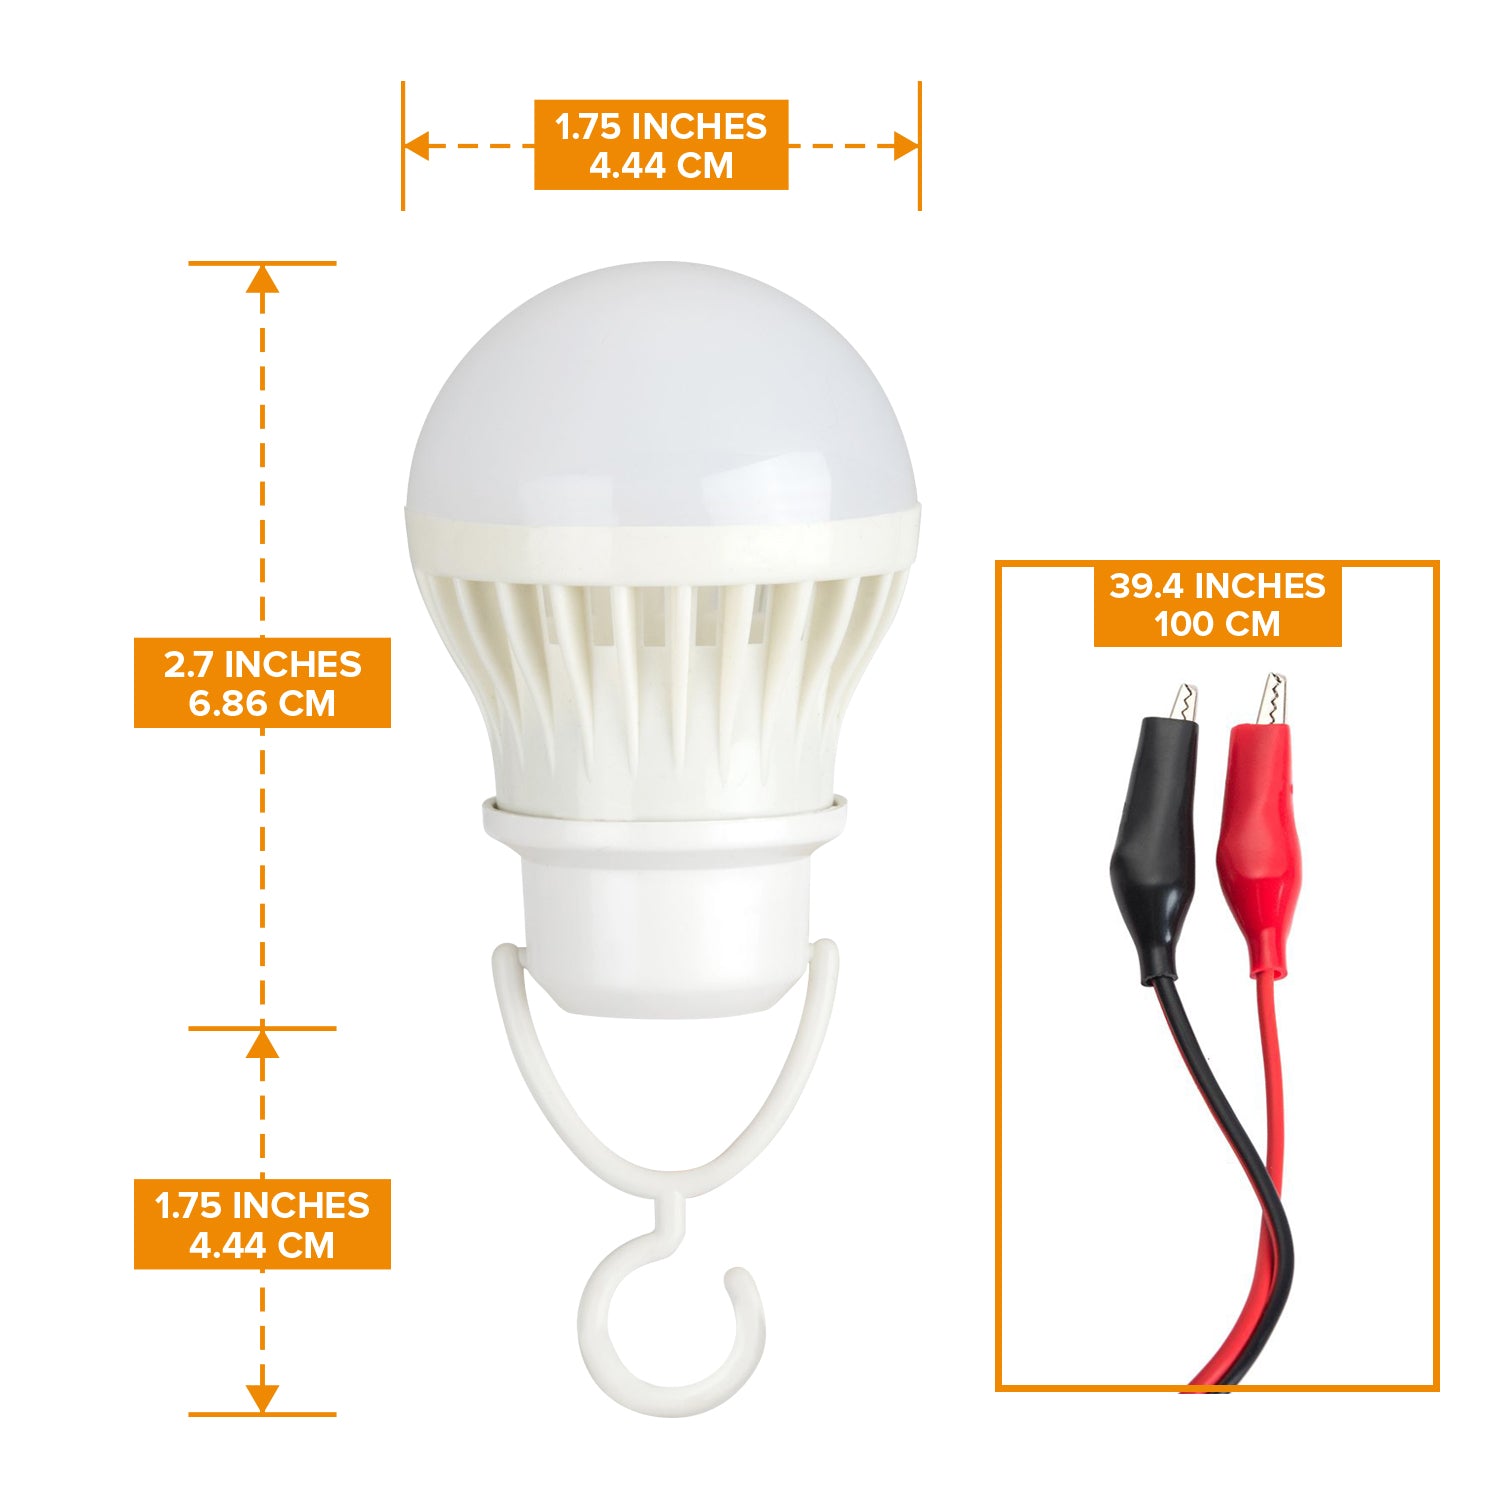 6V Battery 3W Powerful LED Bulb w Wire and Clip - 12VMonster Lighting